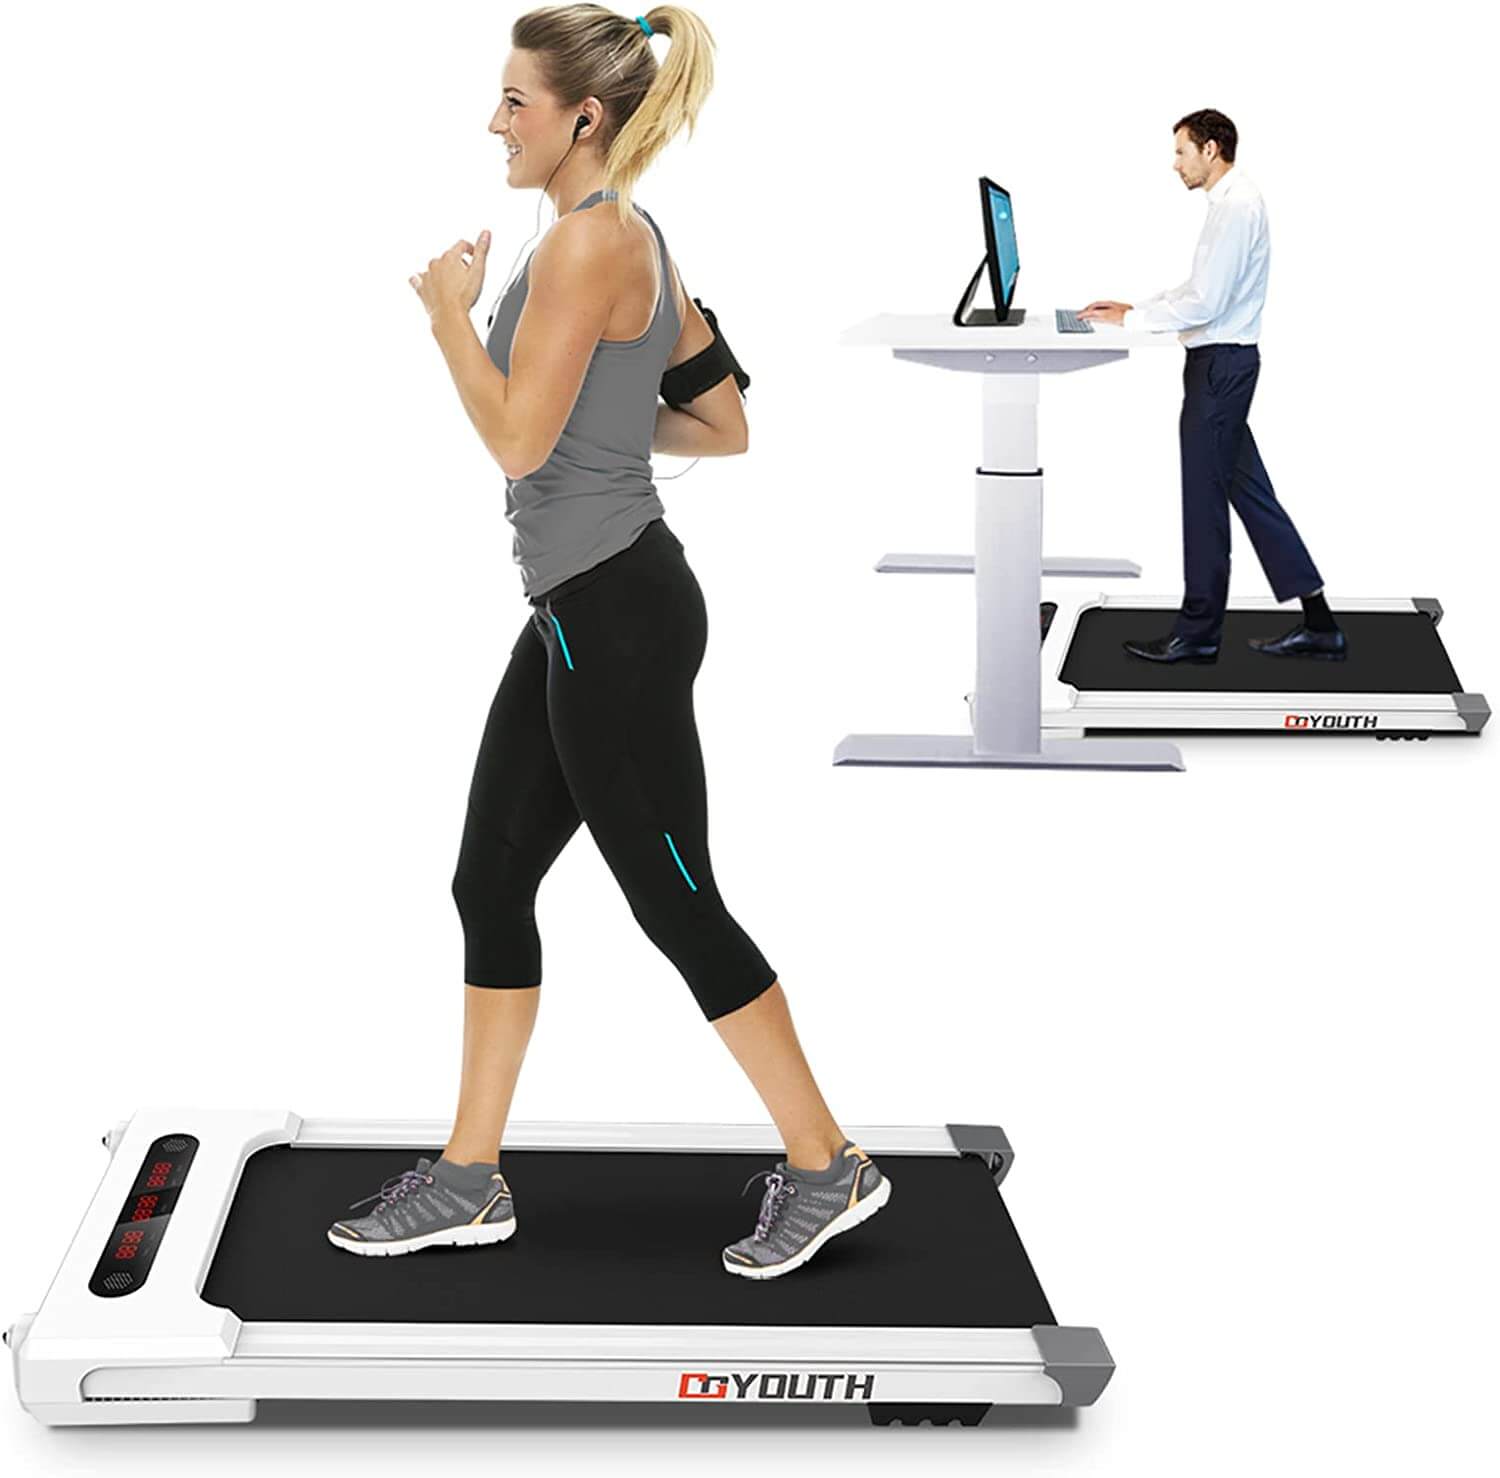 woman jugging on treadmill in athletic clothes in front of man in professional clothes walking on treadmill